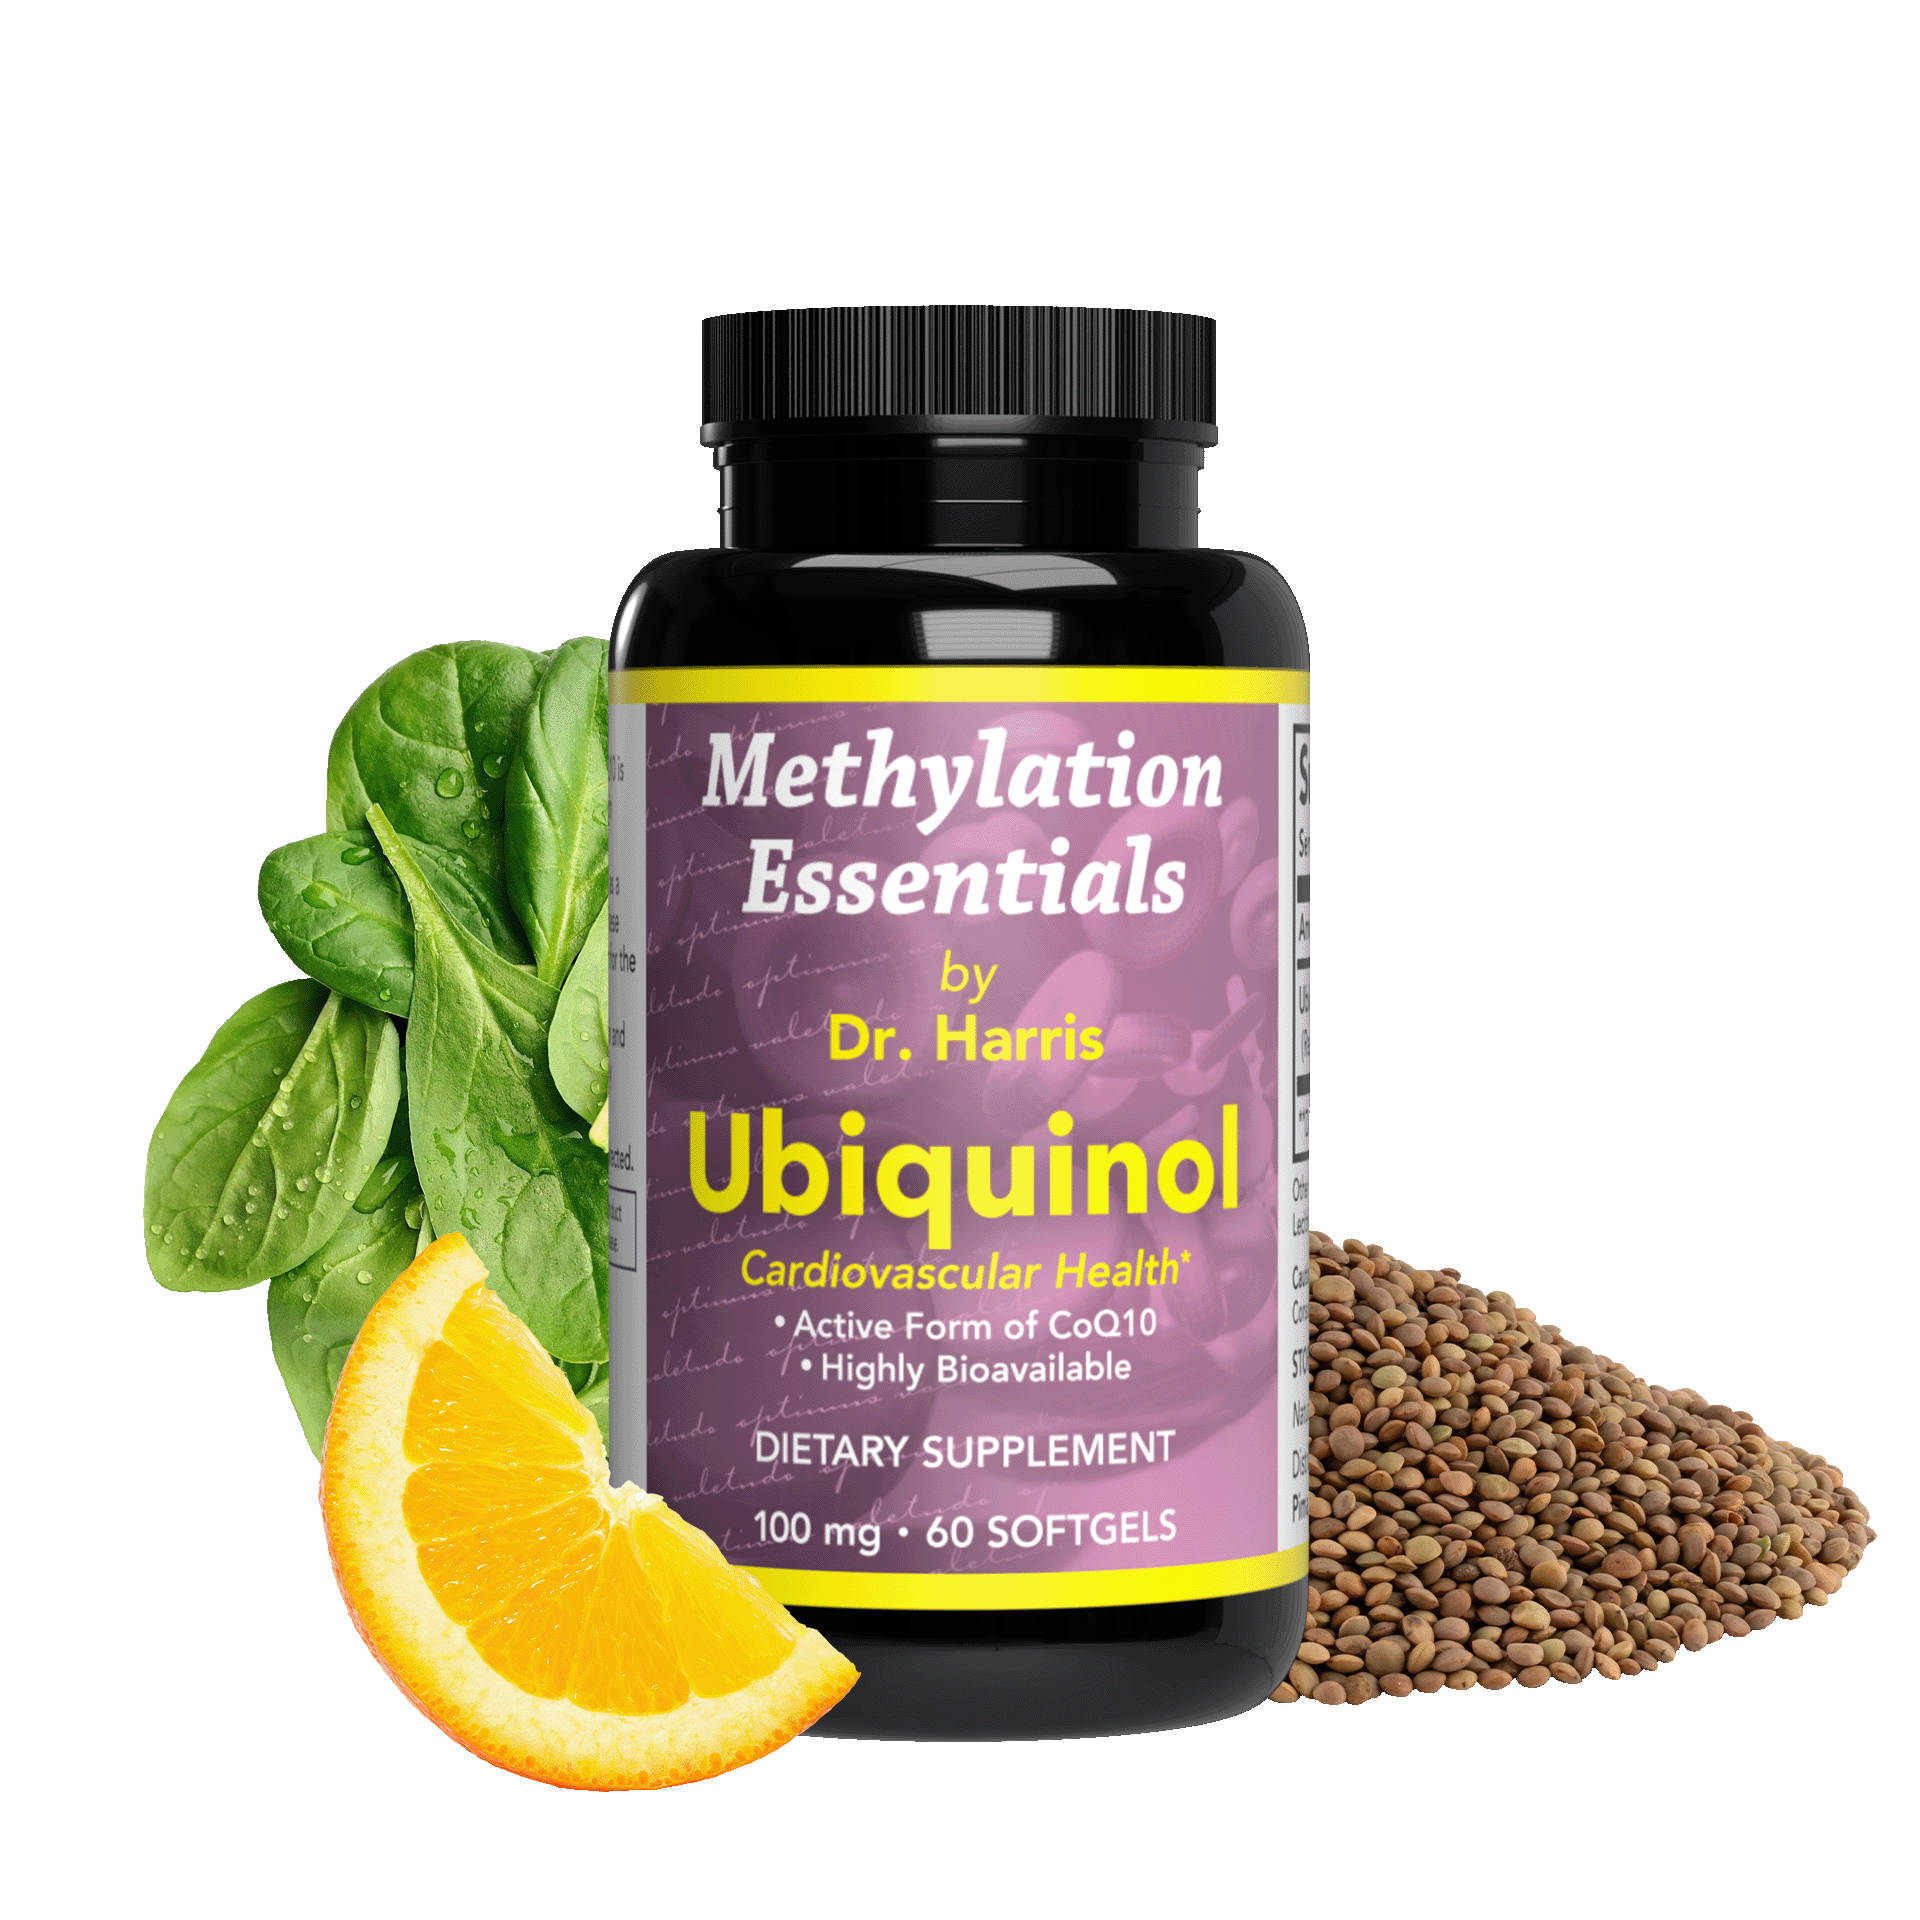 Image of a bottle of Essentials Ubiquinol. Around the bottle are lentils, spinach, and an orange slice.